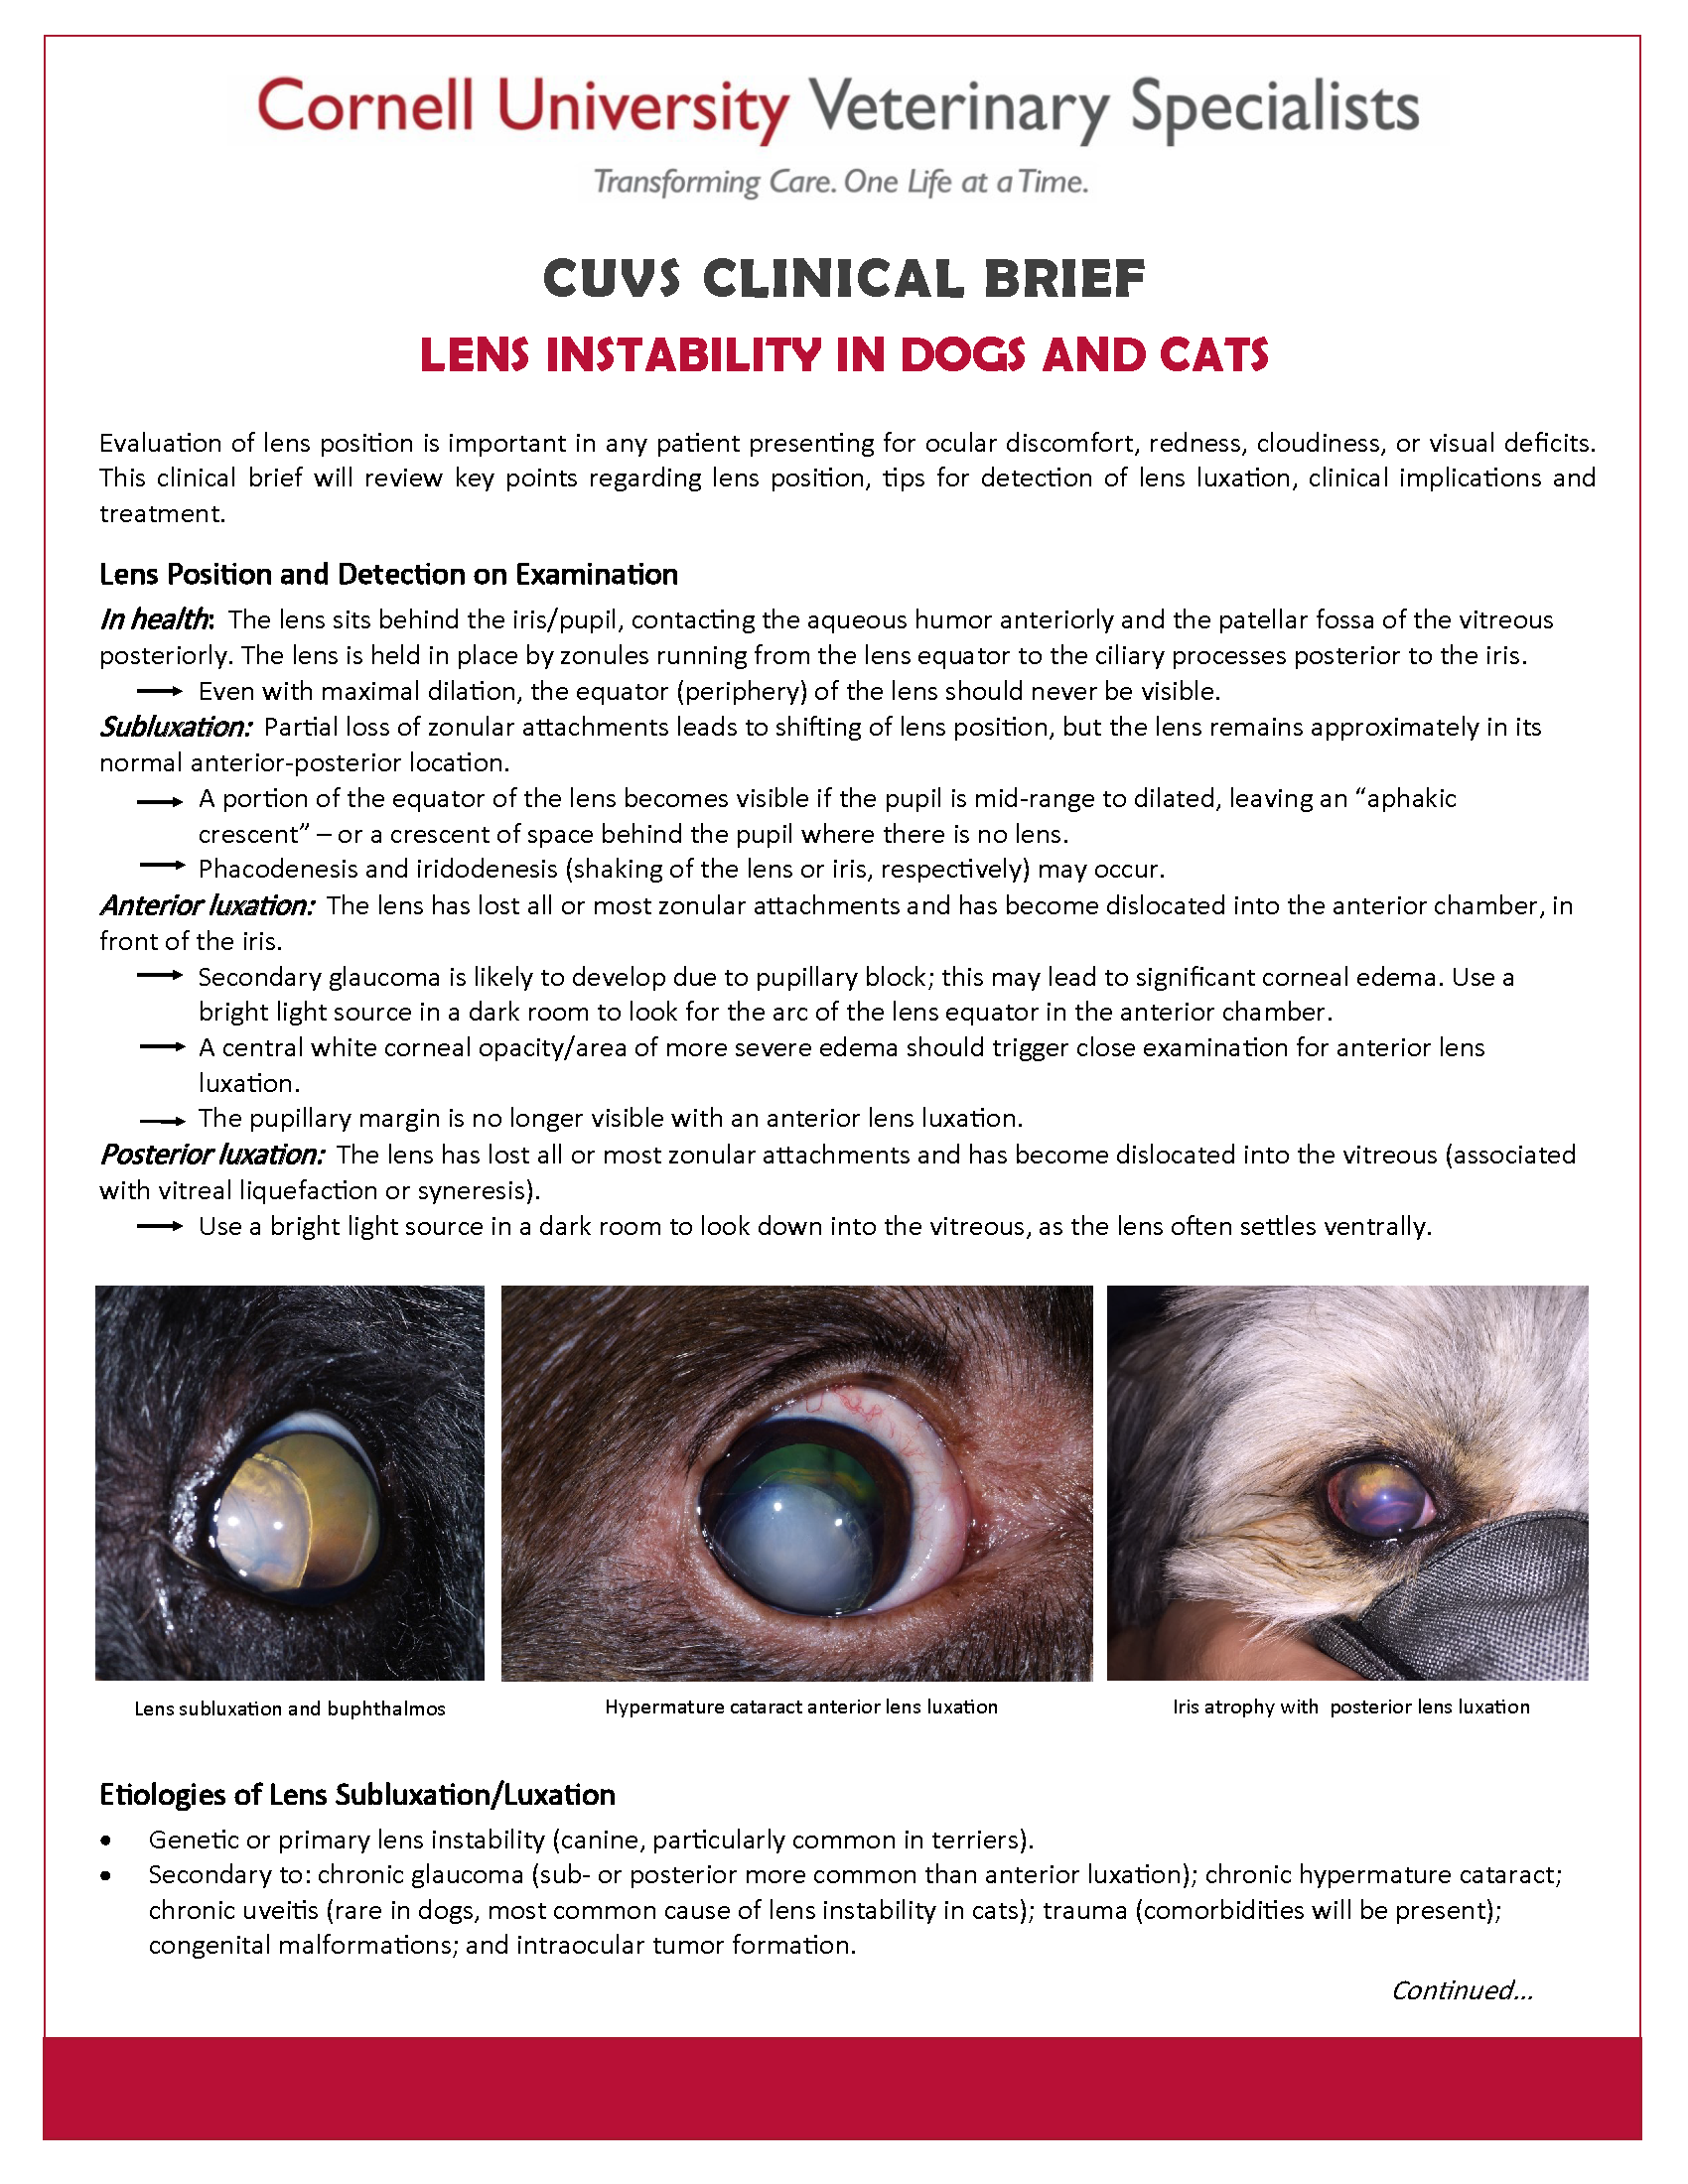 Clinical Brief - Lens Instability in Dogs and Cats